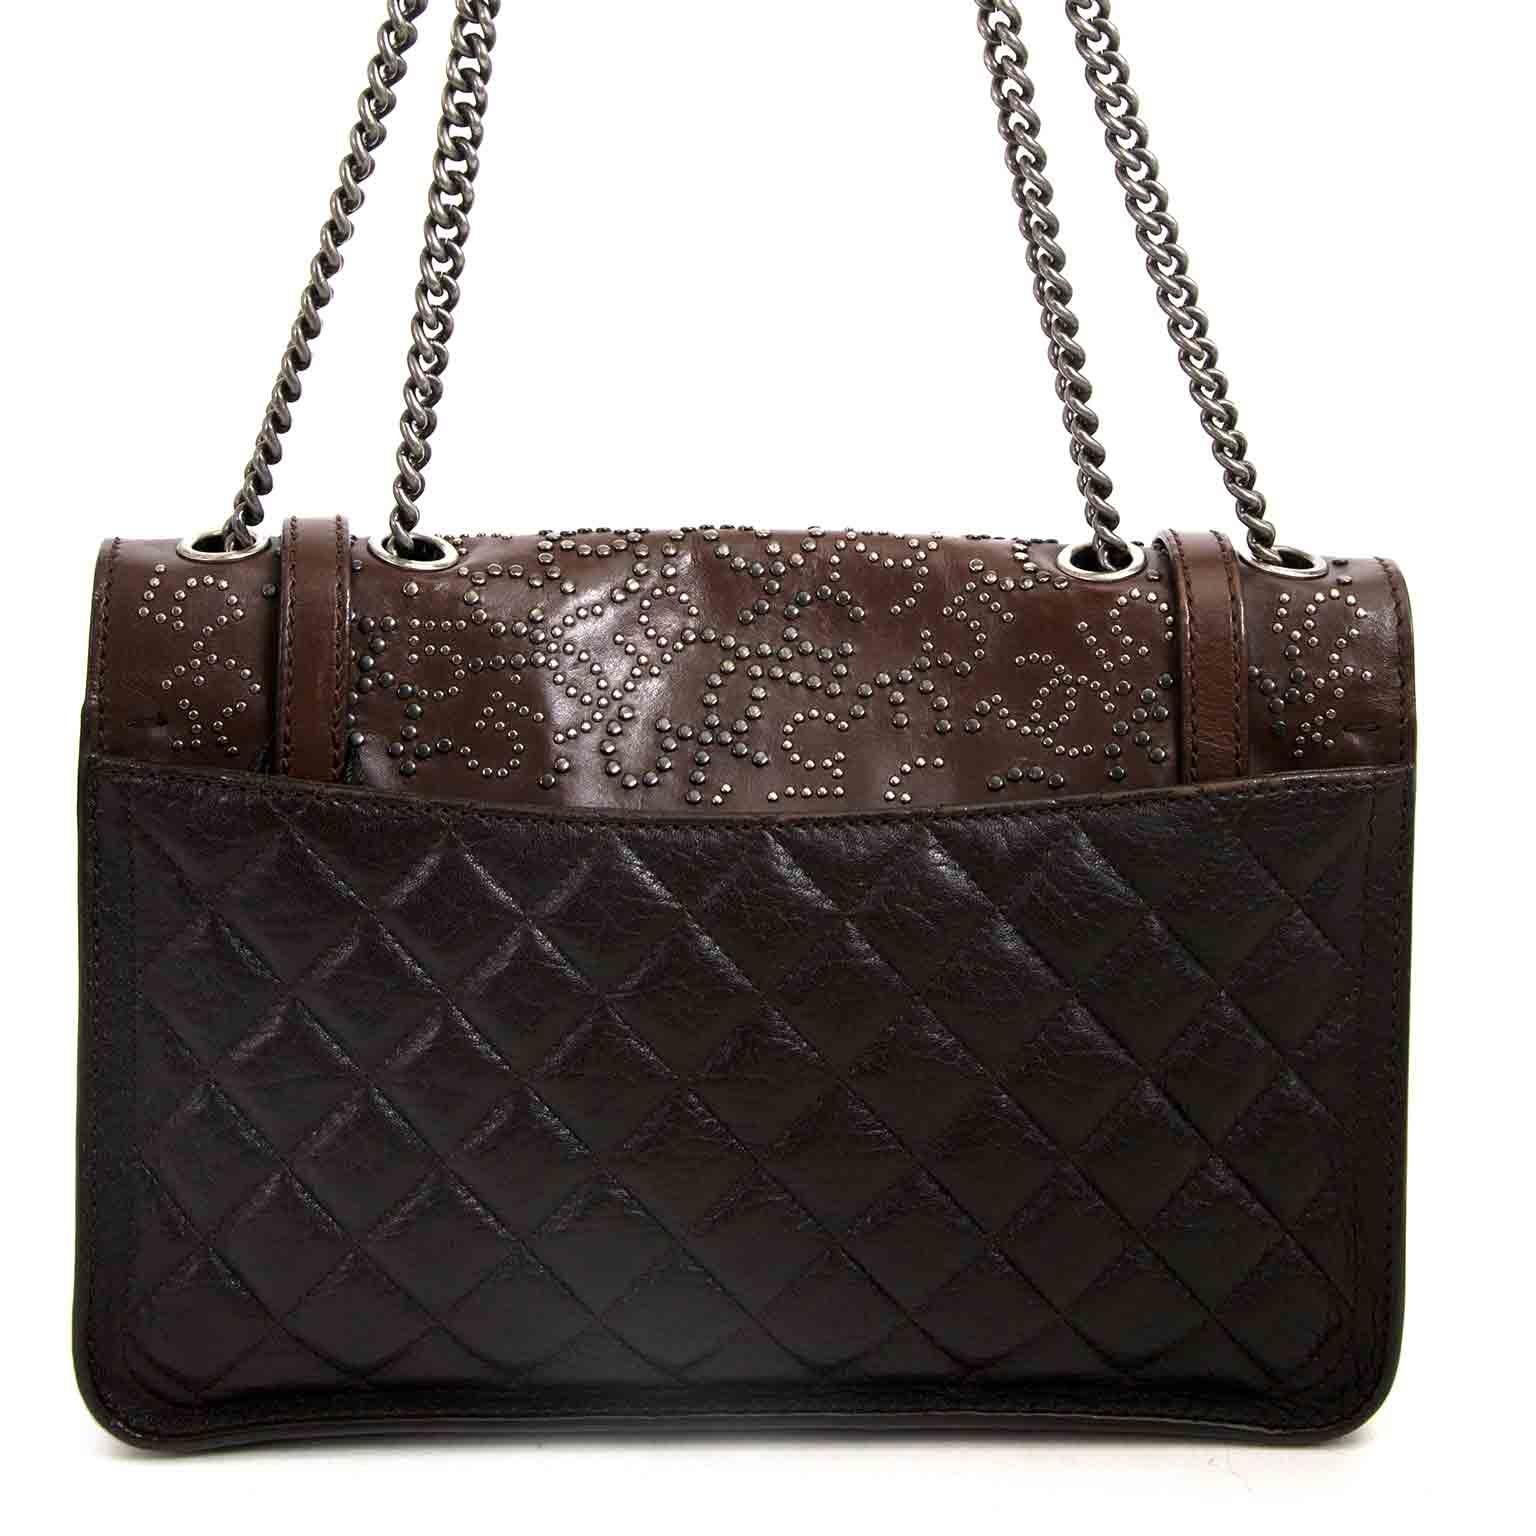 Very good condition

Chanel Paris Dallas Studded Lambskin Western Bag 

The Paris Dallas Chanel collection contains some of the most unique bags, like this beautiful design. 
It's crafted from lambskin leather in different brown tones and finished